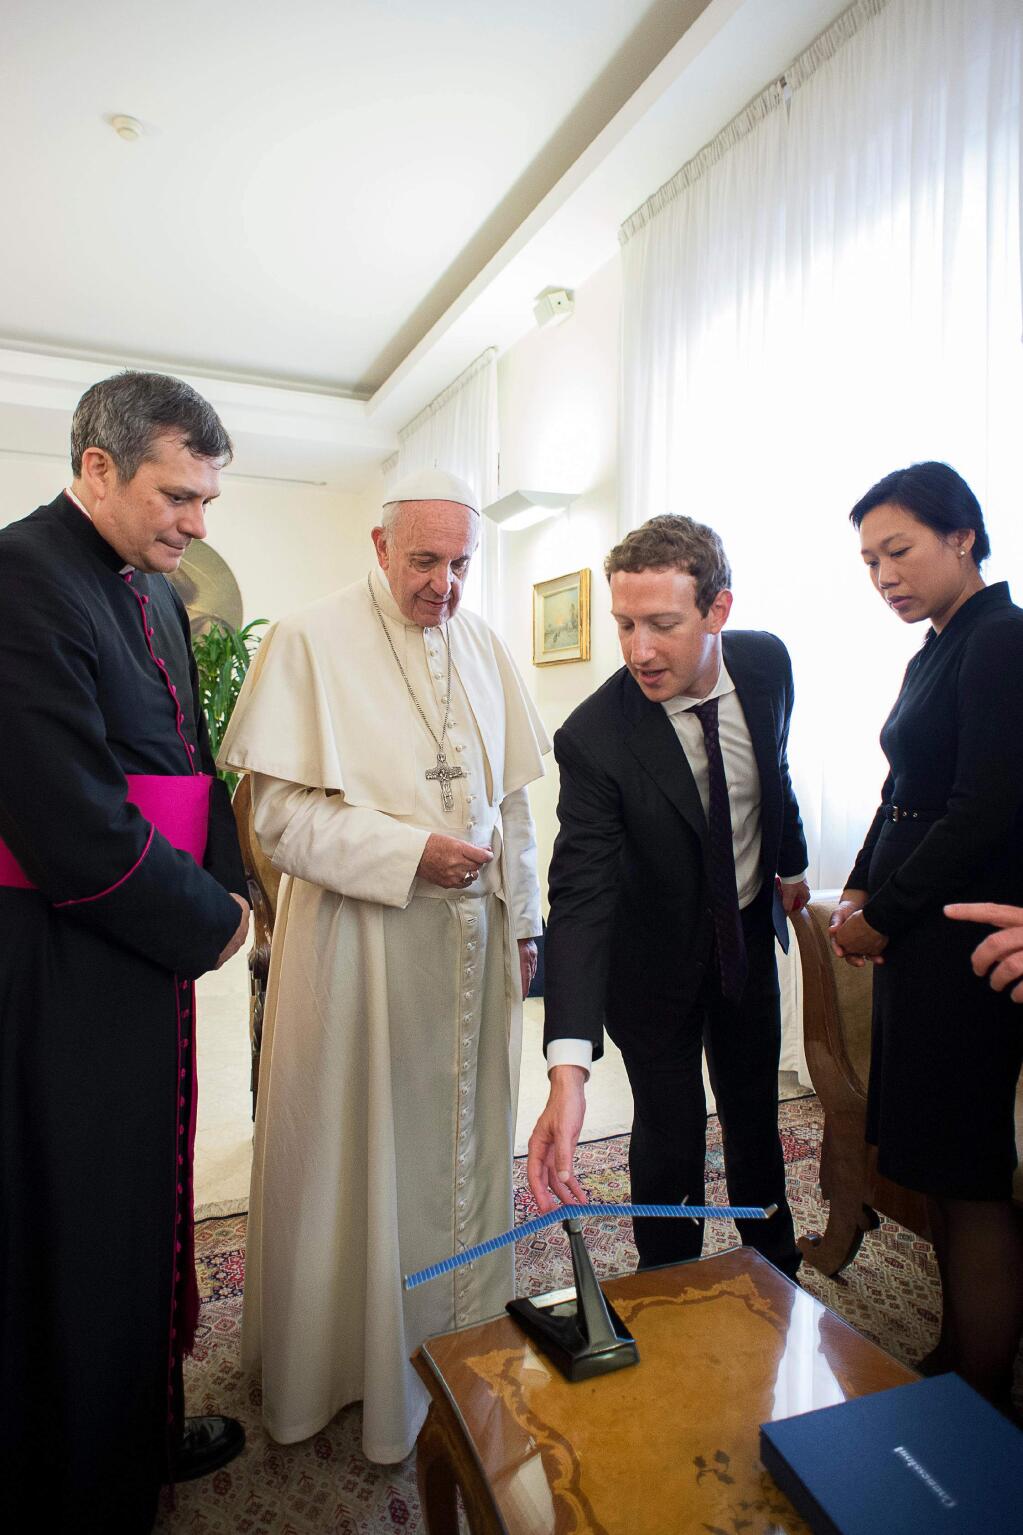 Pope Francis meets Facebook founder and CEO Mark Zuckerberg, second from right, and his wife Priscilla Chan, right, at the Santa Marta residence, the guest house in Vatican City where the pope lives, Monday, Aug. 29, 2016. Vatican spokesman Greg Burke says a topic of discussion at Monday's meeting was “how to use communication technologies to alleviate poverty, encourage a culture of encounter, and make a message of hope arrive, especially to those most in need.'' (L'Osservatore Romano/Pool Photo via AP)